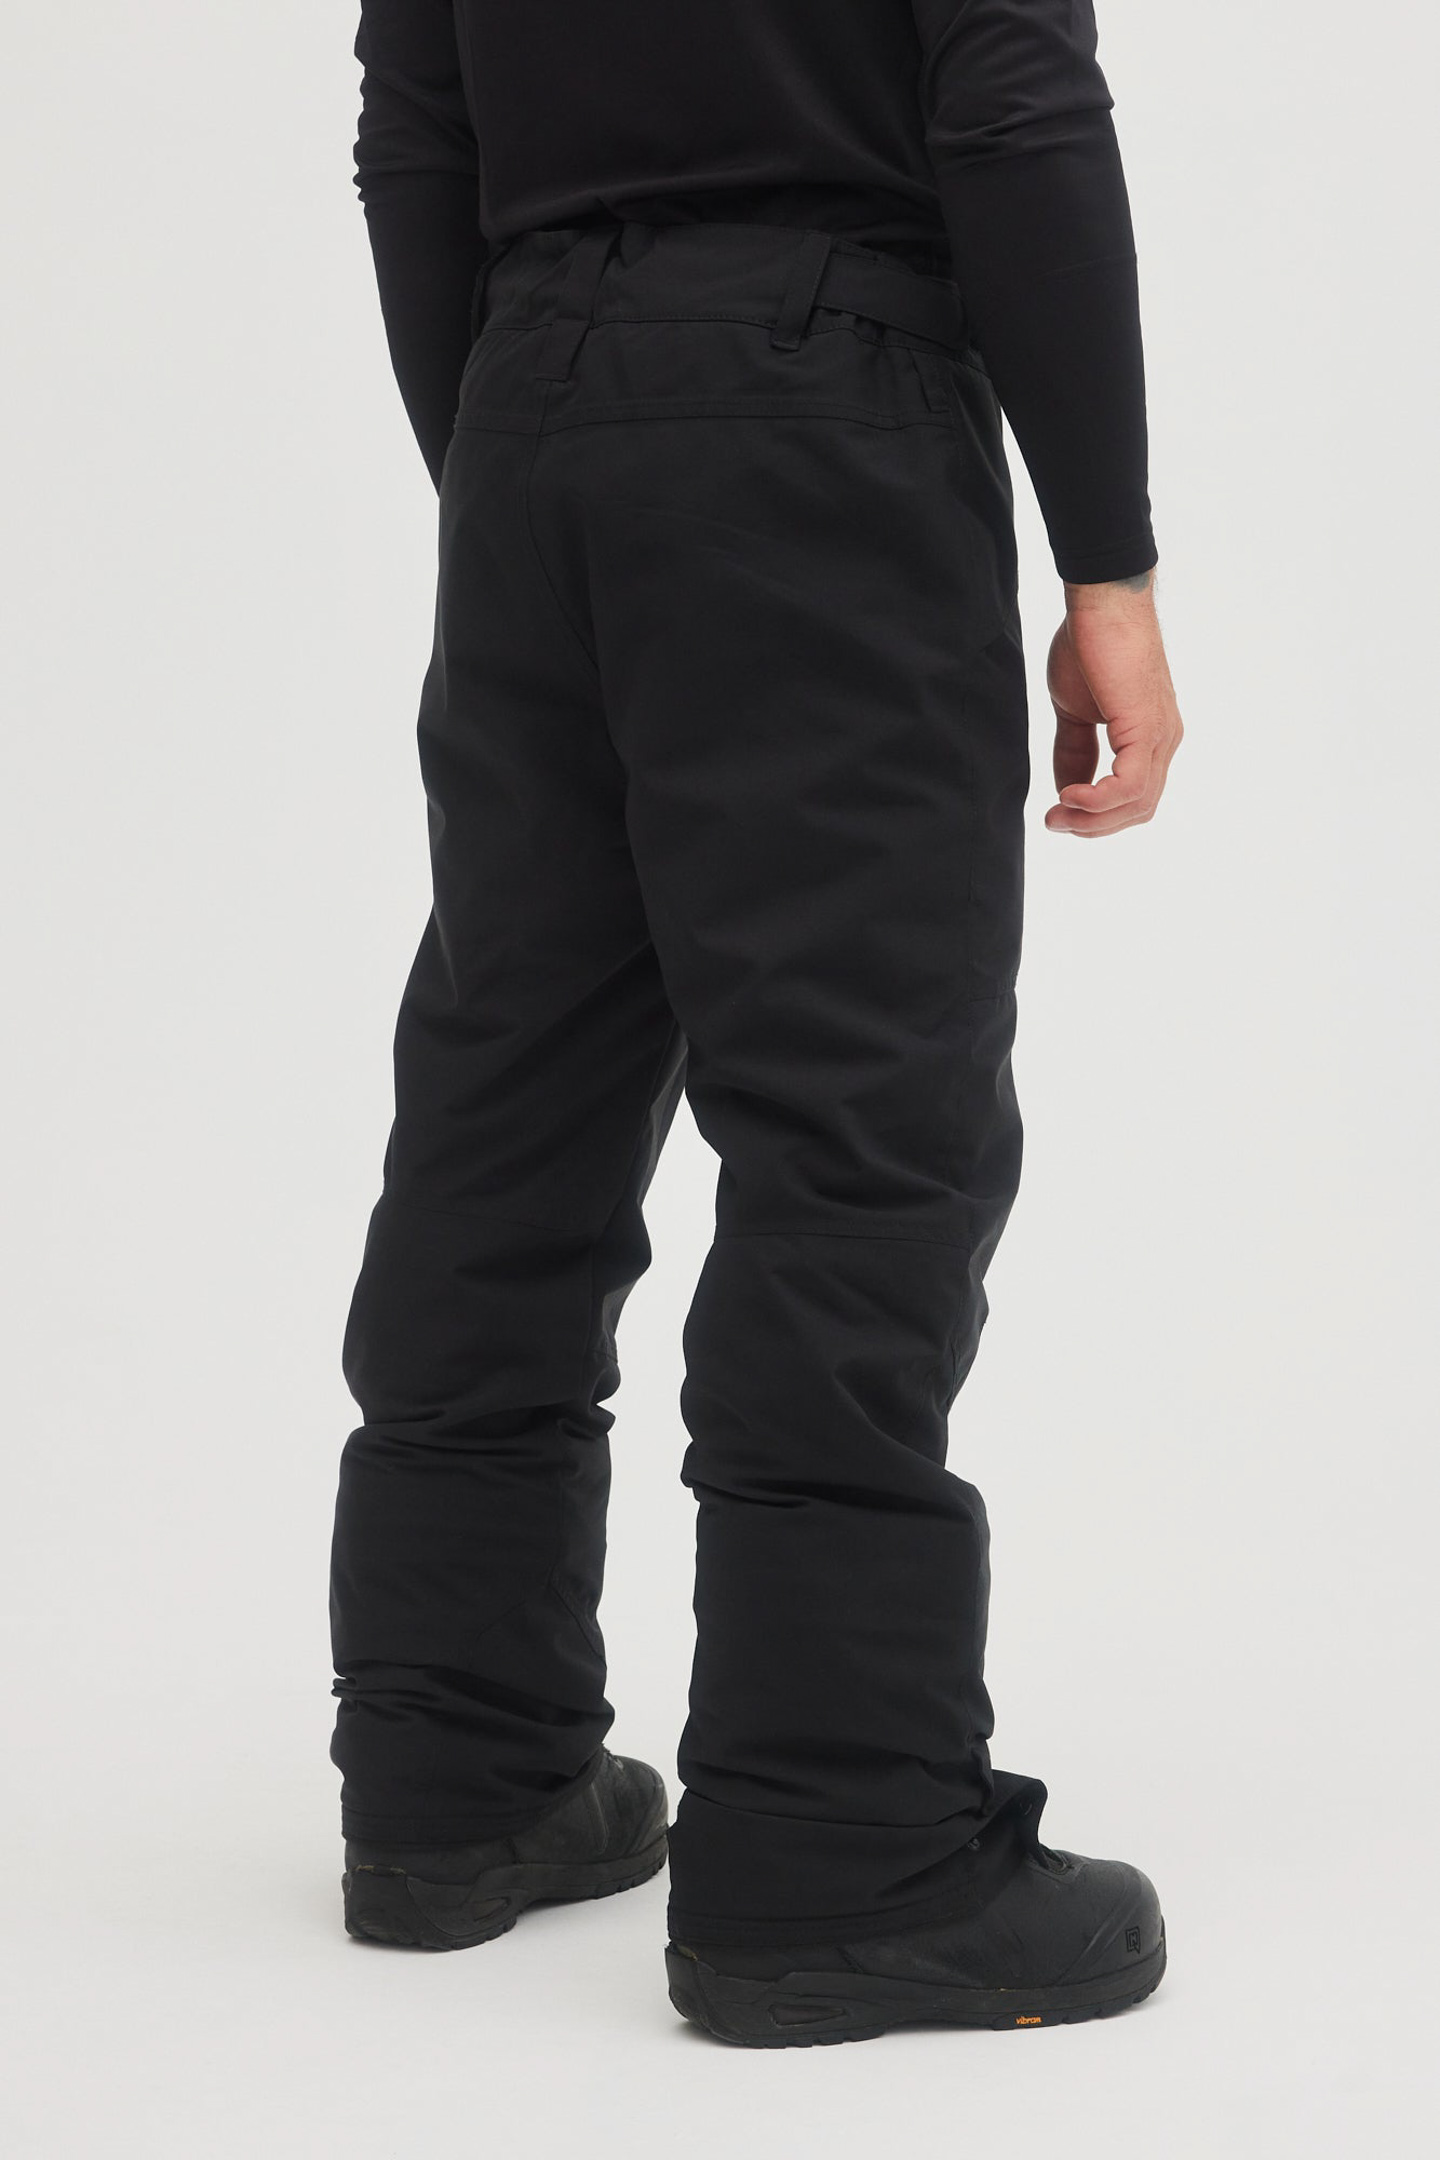 Pants Black Insulated - Out | O\'Neill Hammer